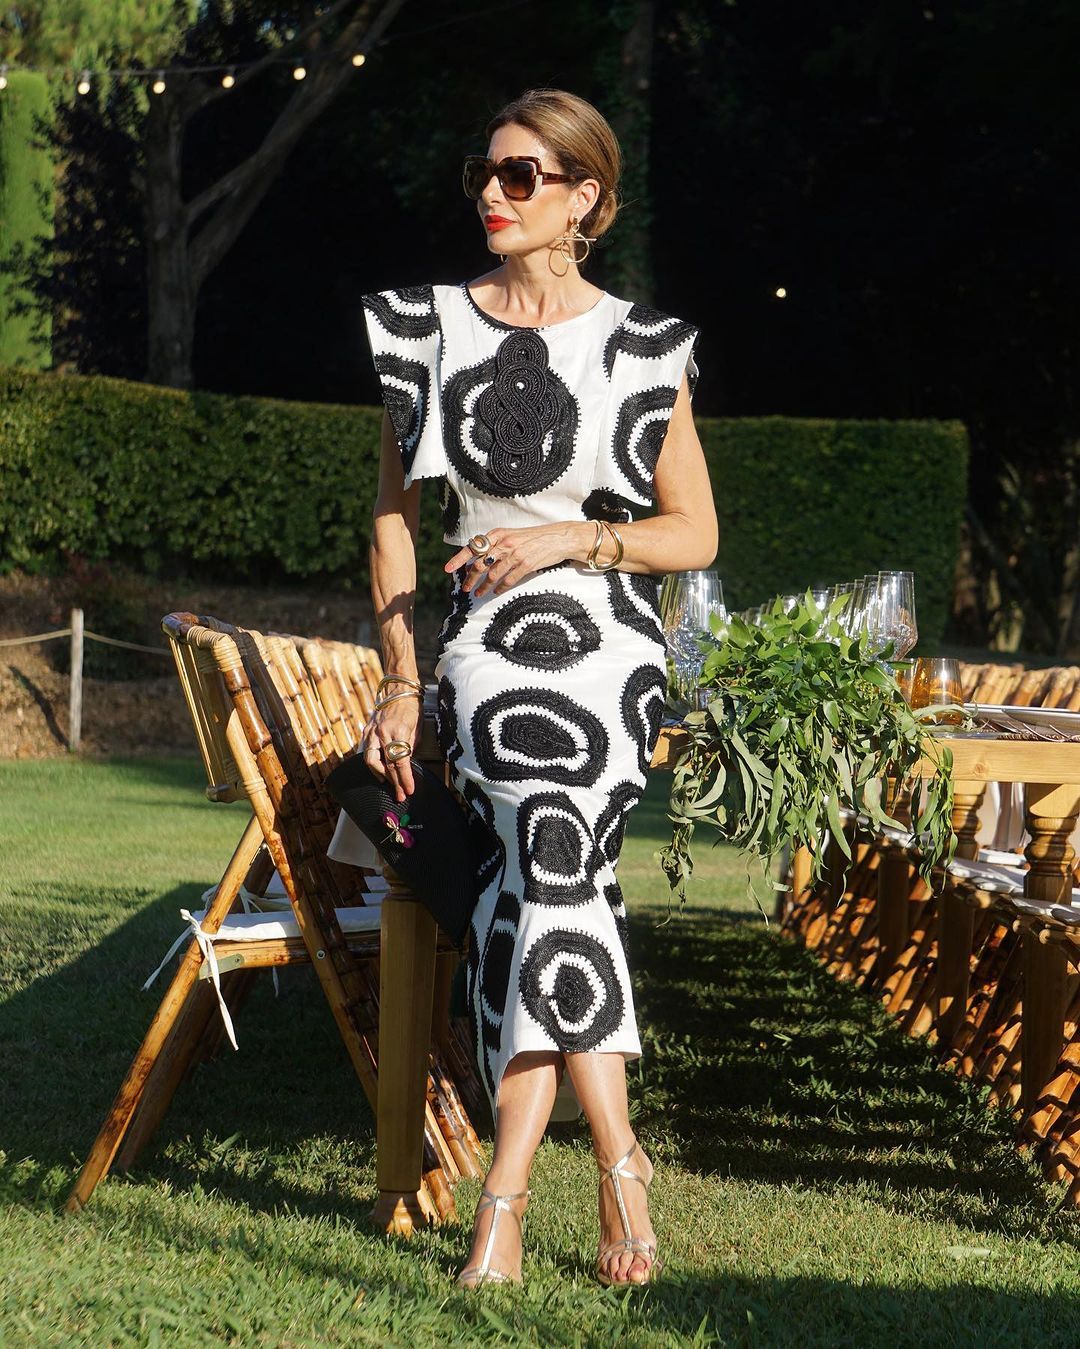 Black and white patterned lace dress